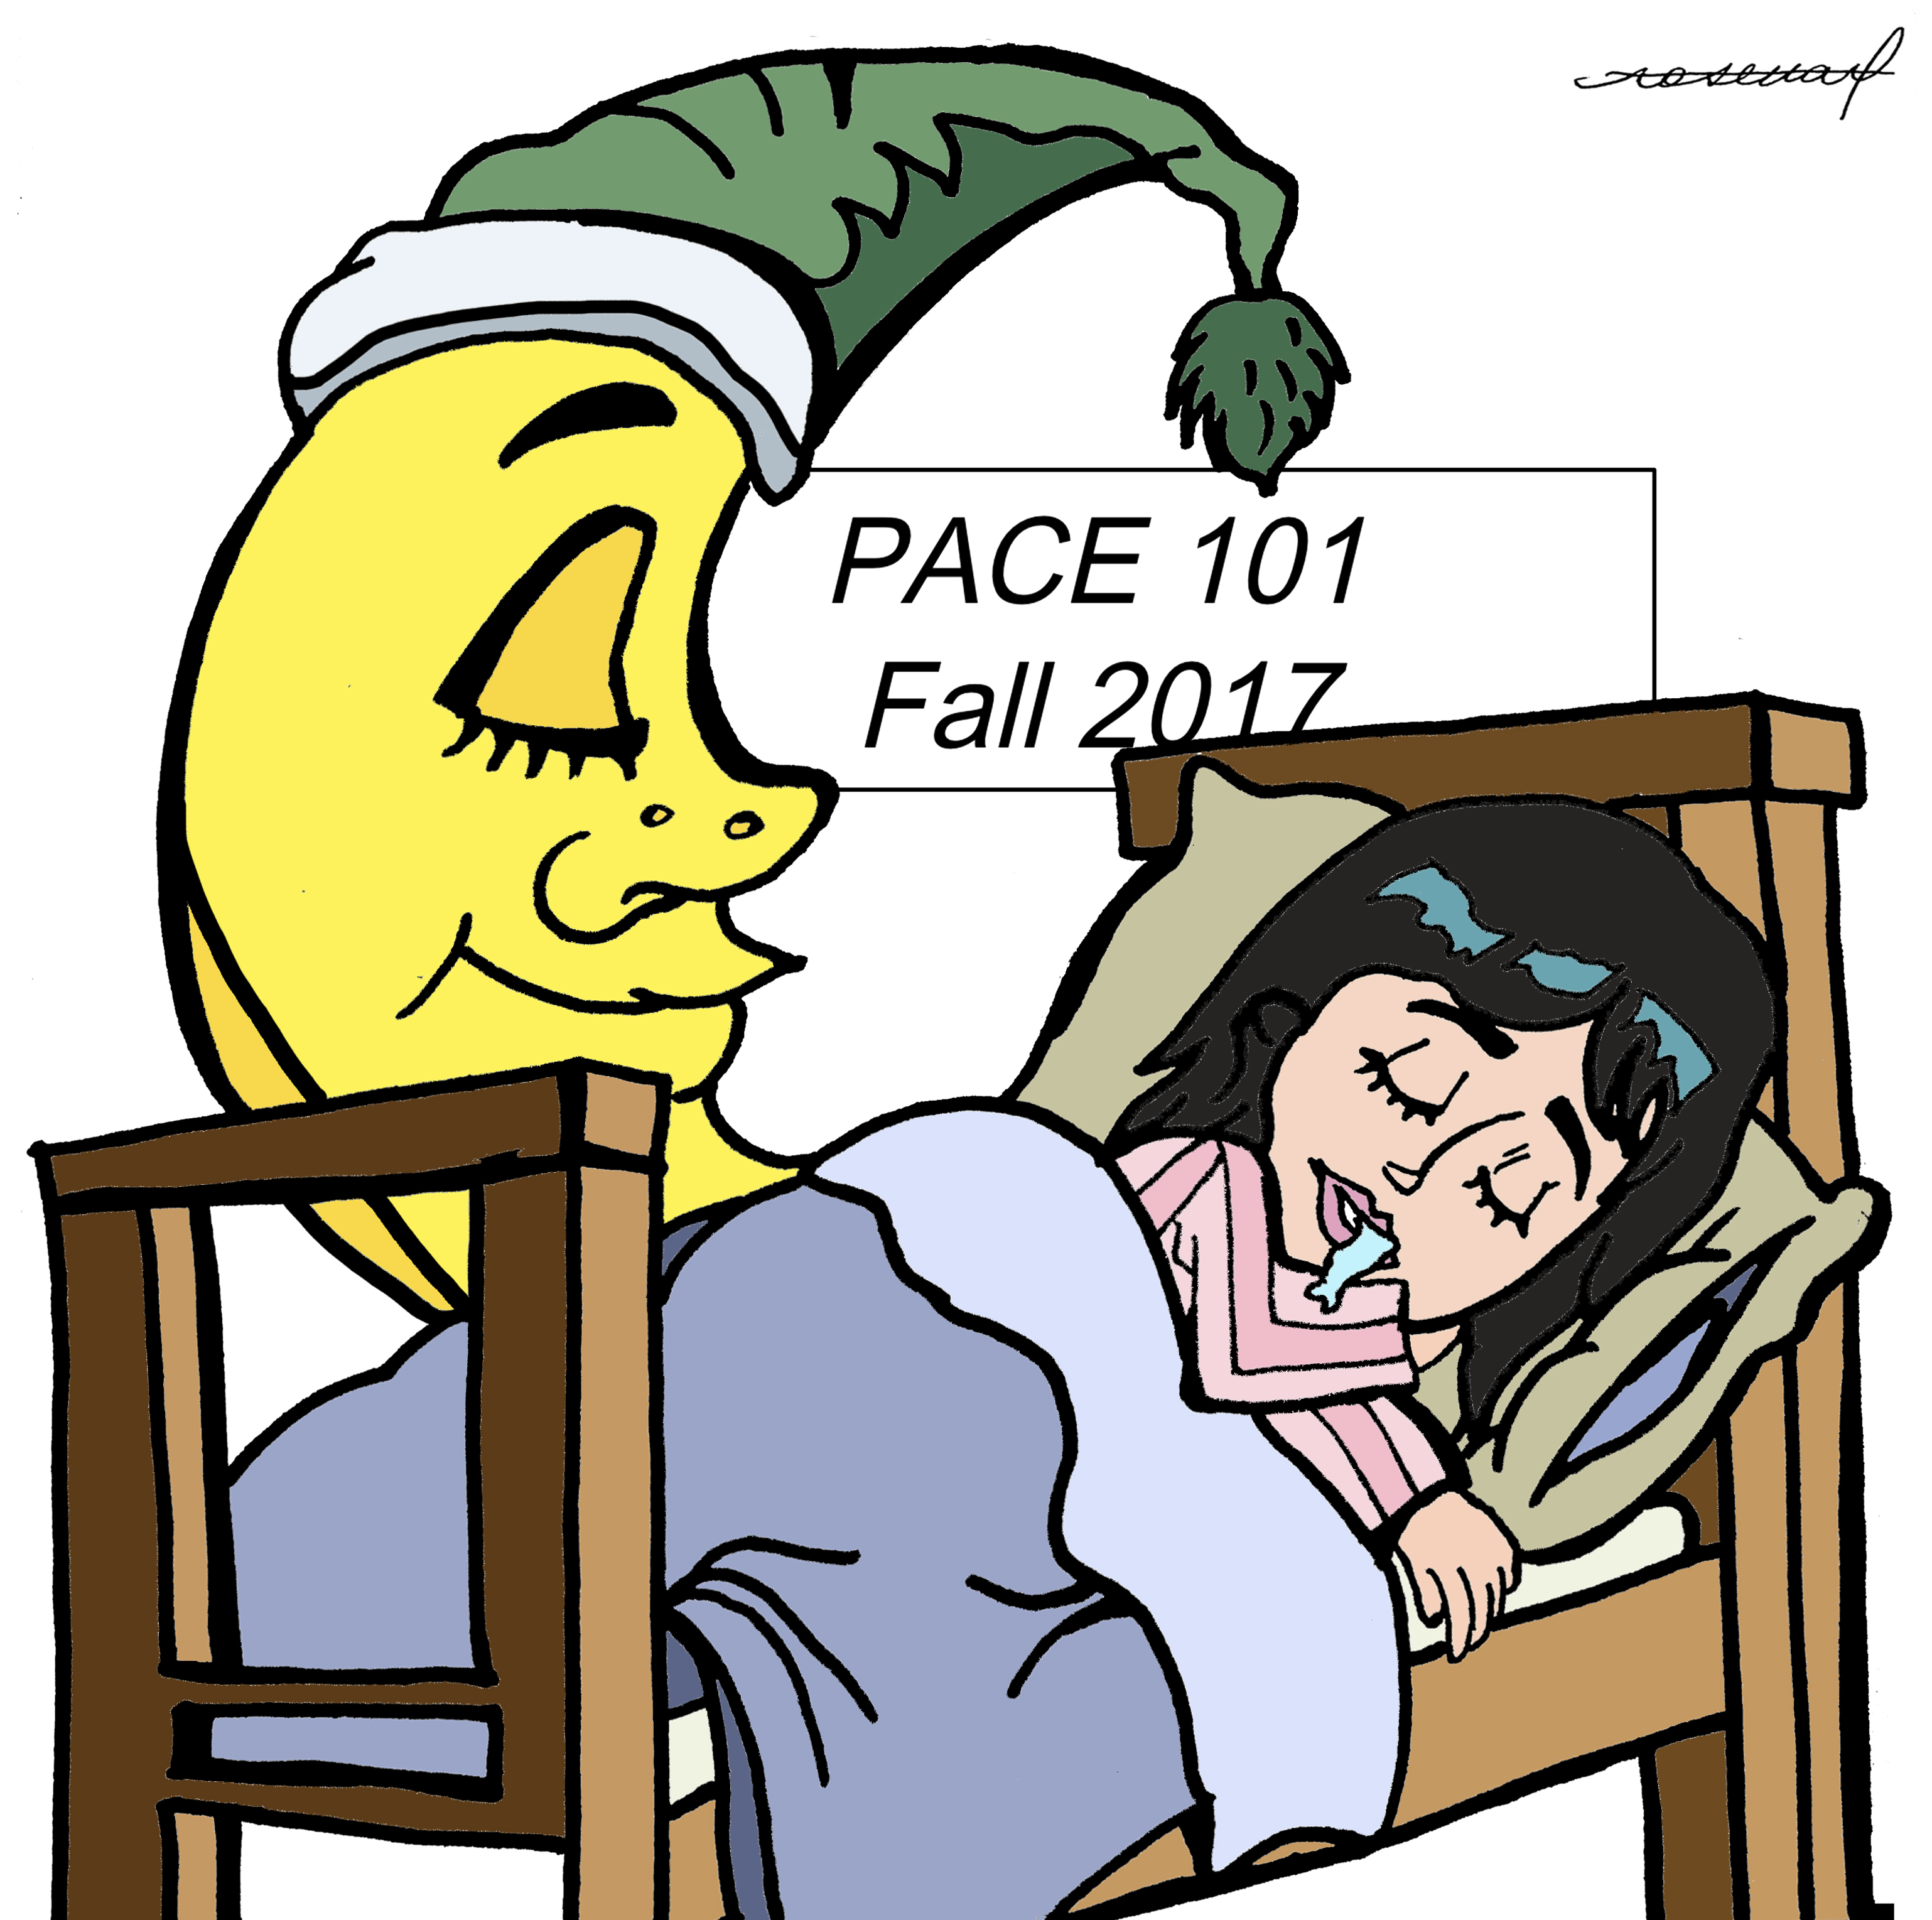 PACE: The Perfect Place to Take a Nap